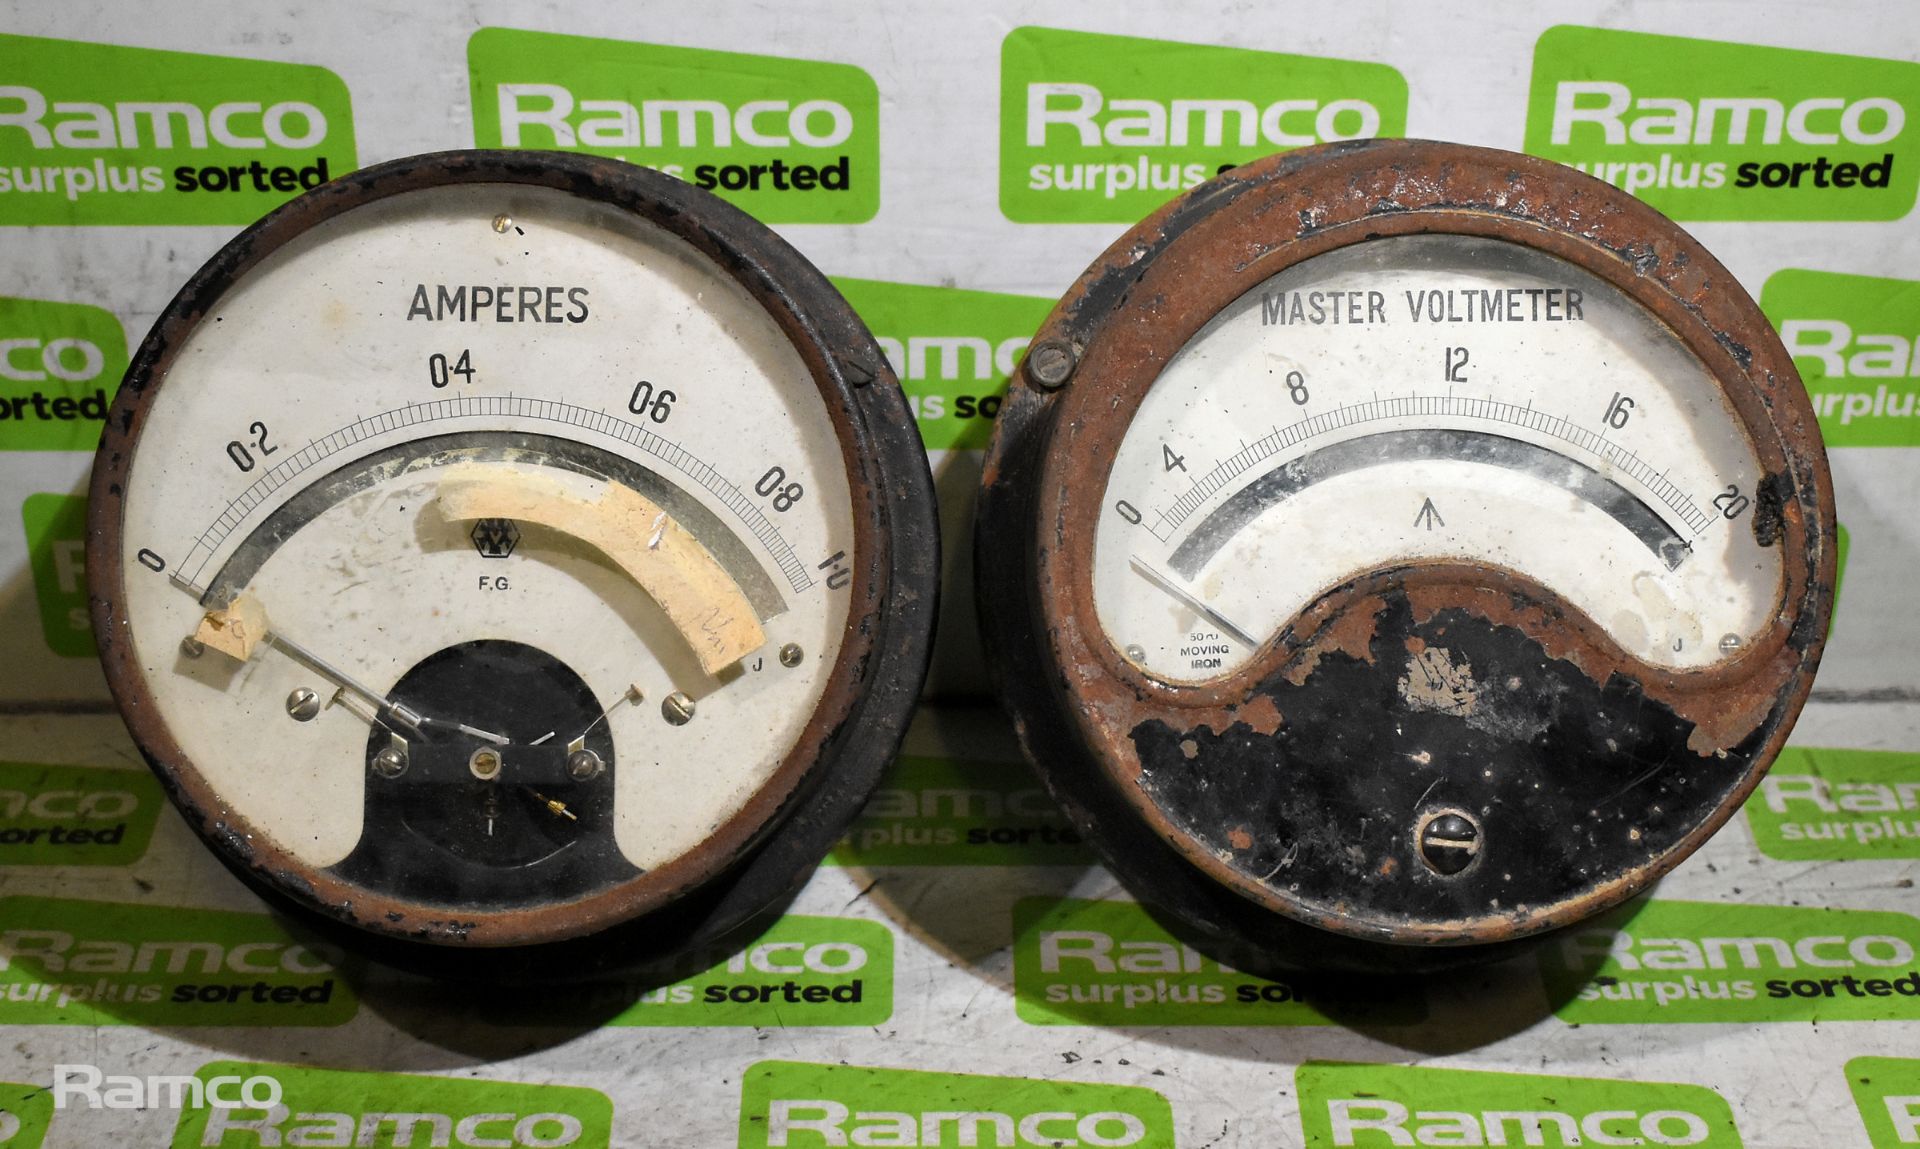 Vintage amp and volt meter, smoke and heat alarm, Panasonic answer phone and extension phone - Image 9 of 11